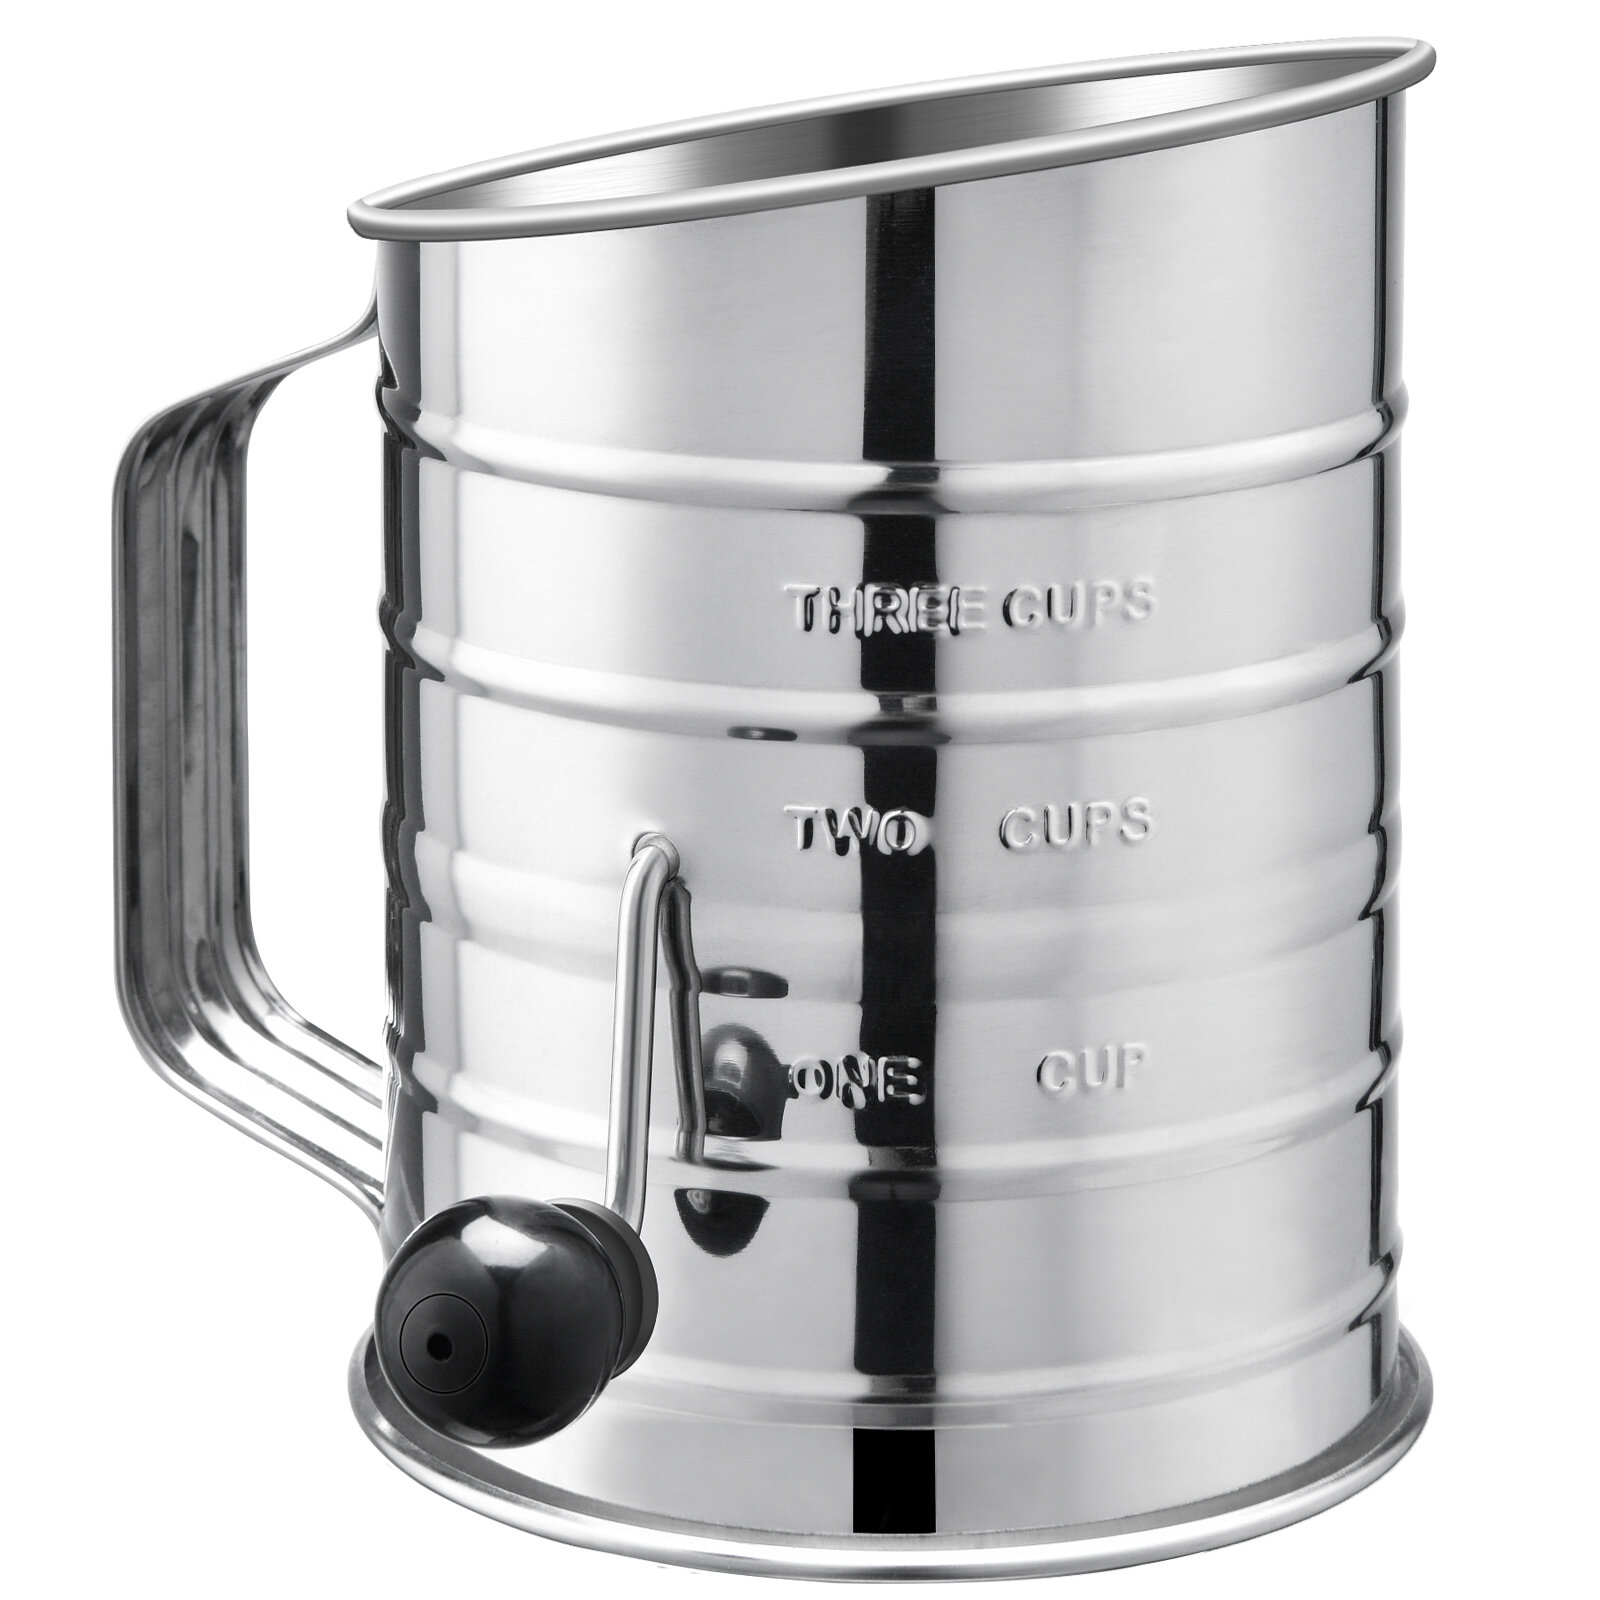 3 cup Crank Flour Sifter - Whisk